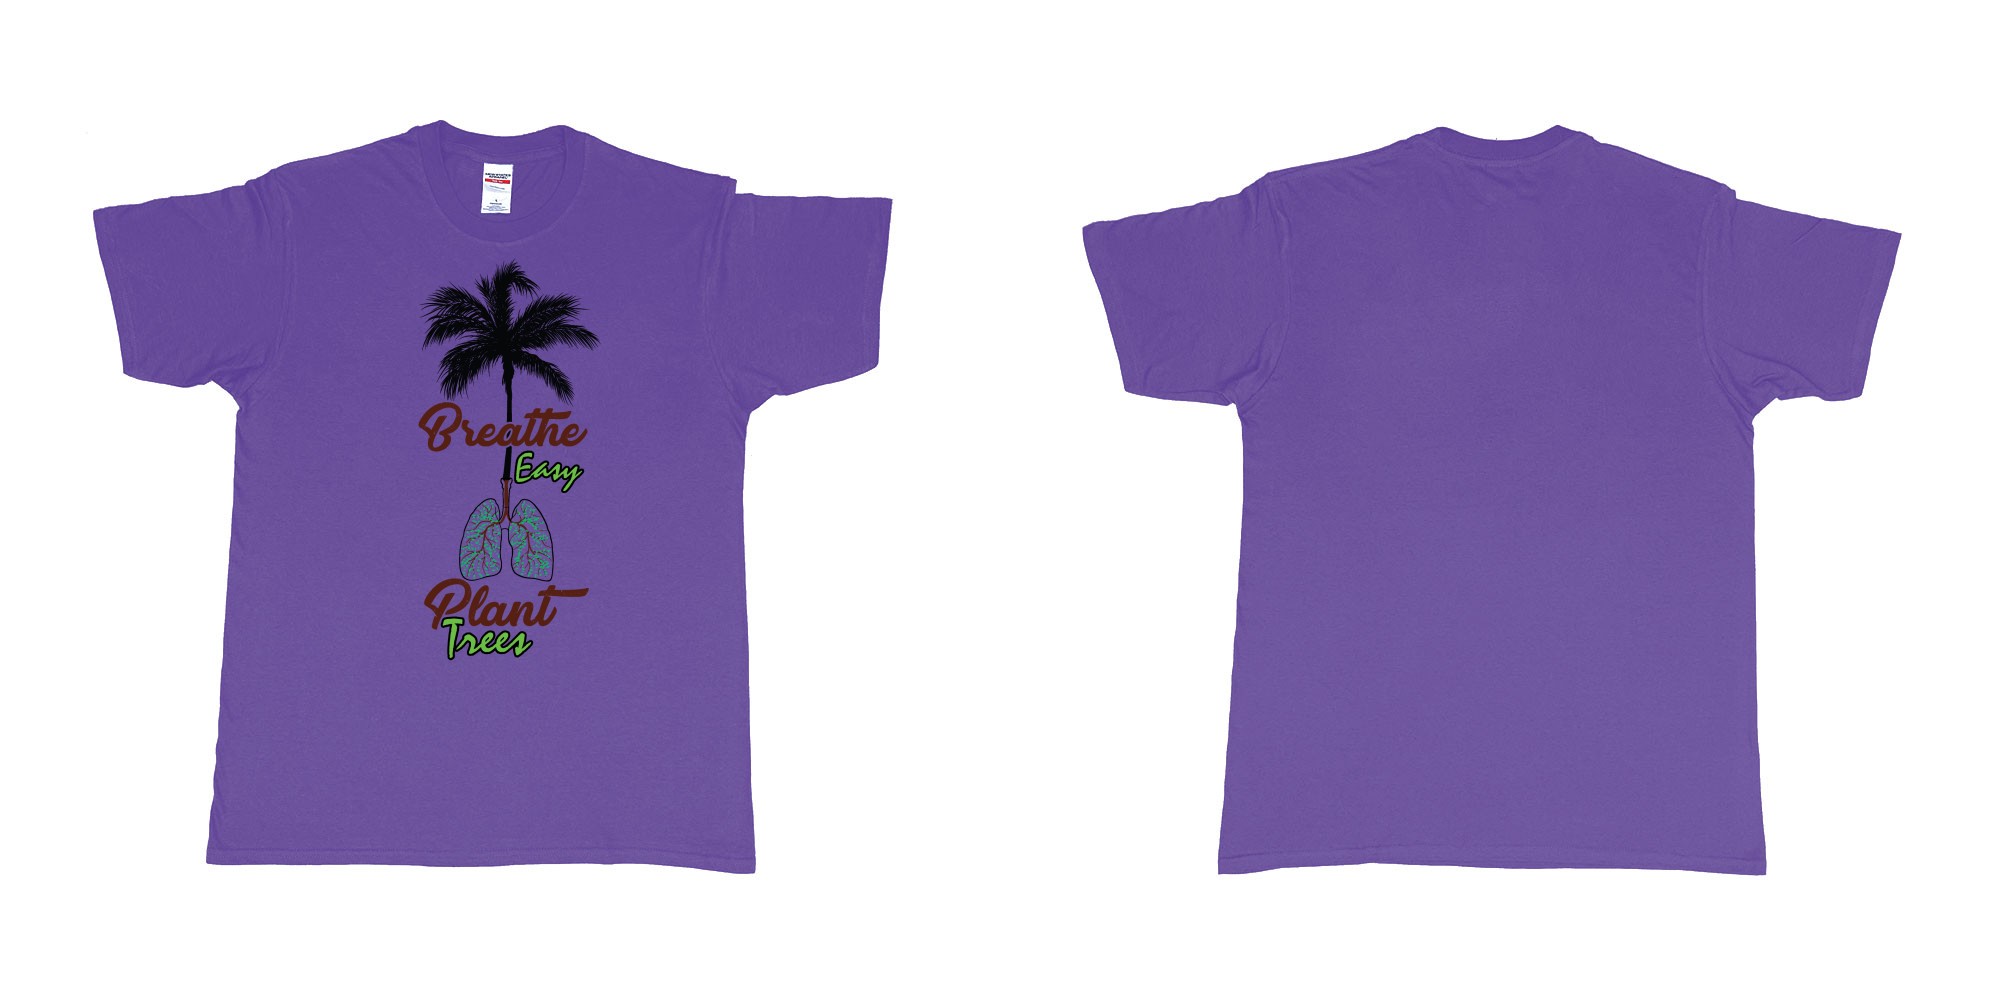 Custom tshirt design breathe easy and plant a tree for better air for everyone in fabric color purple choice your own text made in Bali by The Pirate Way